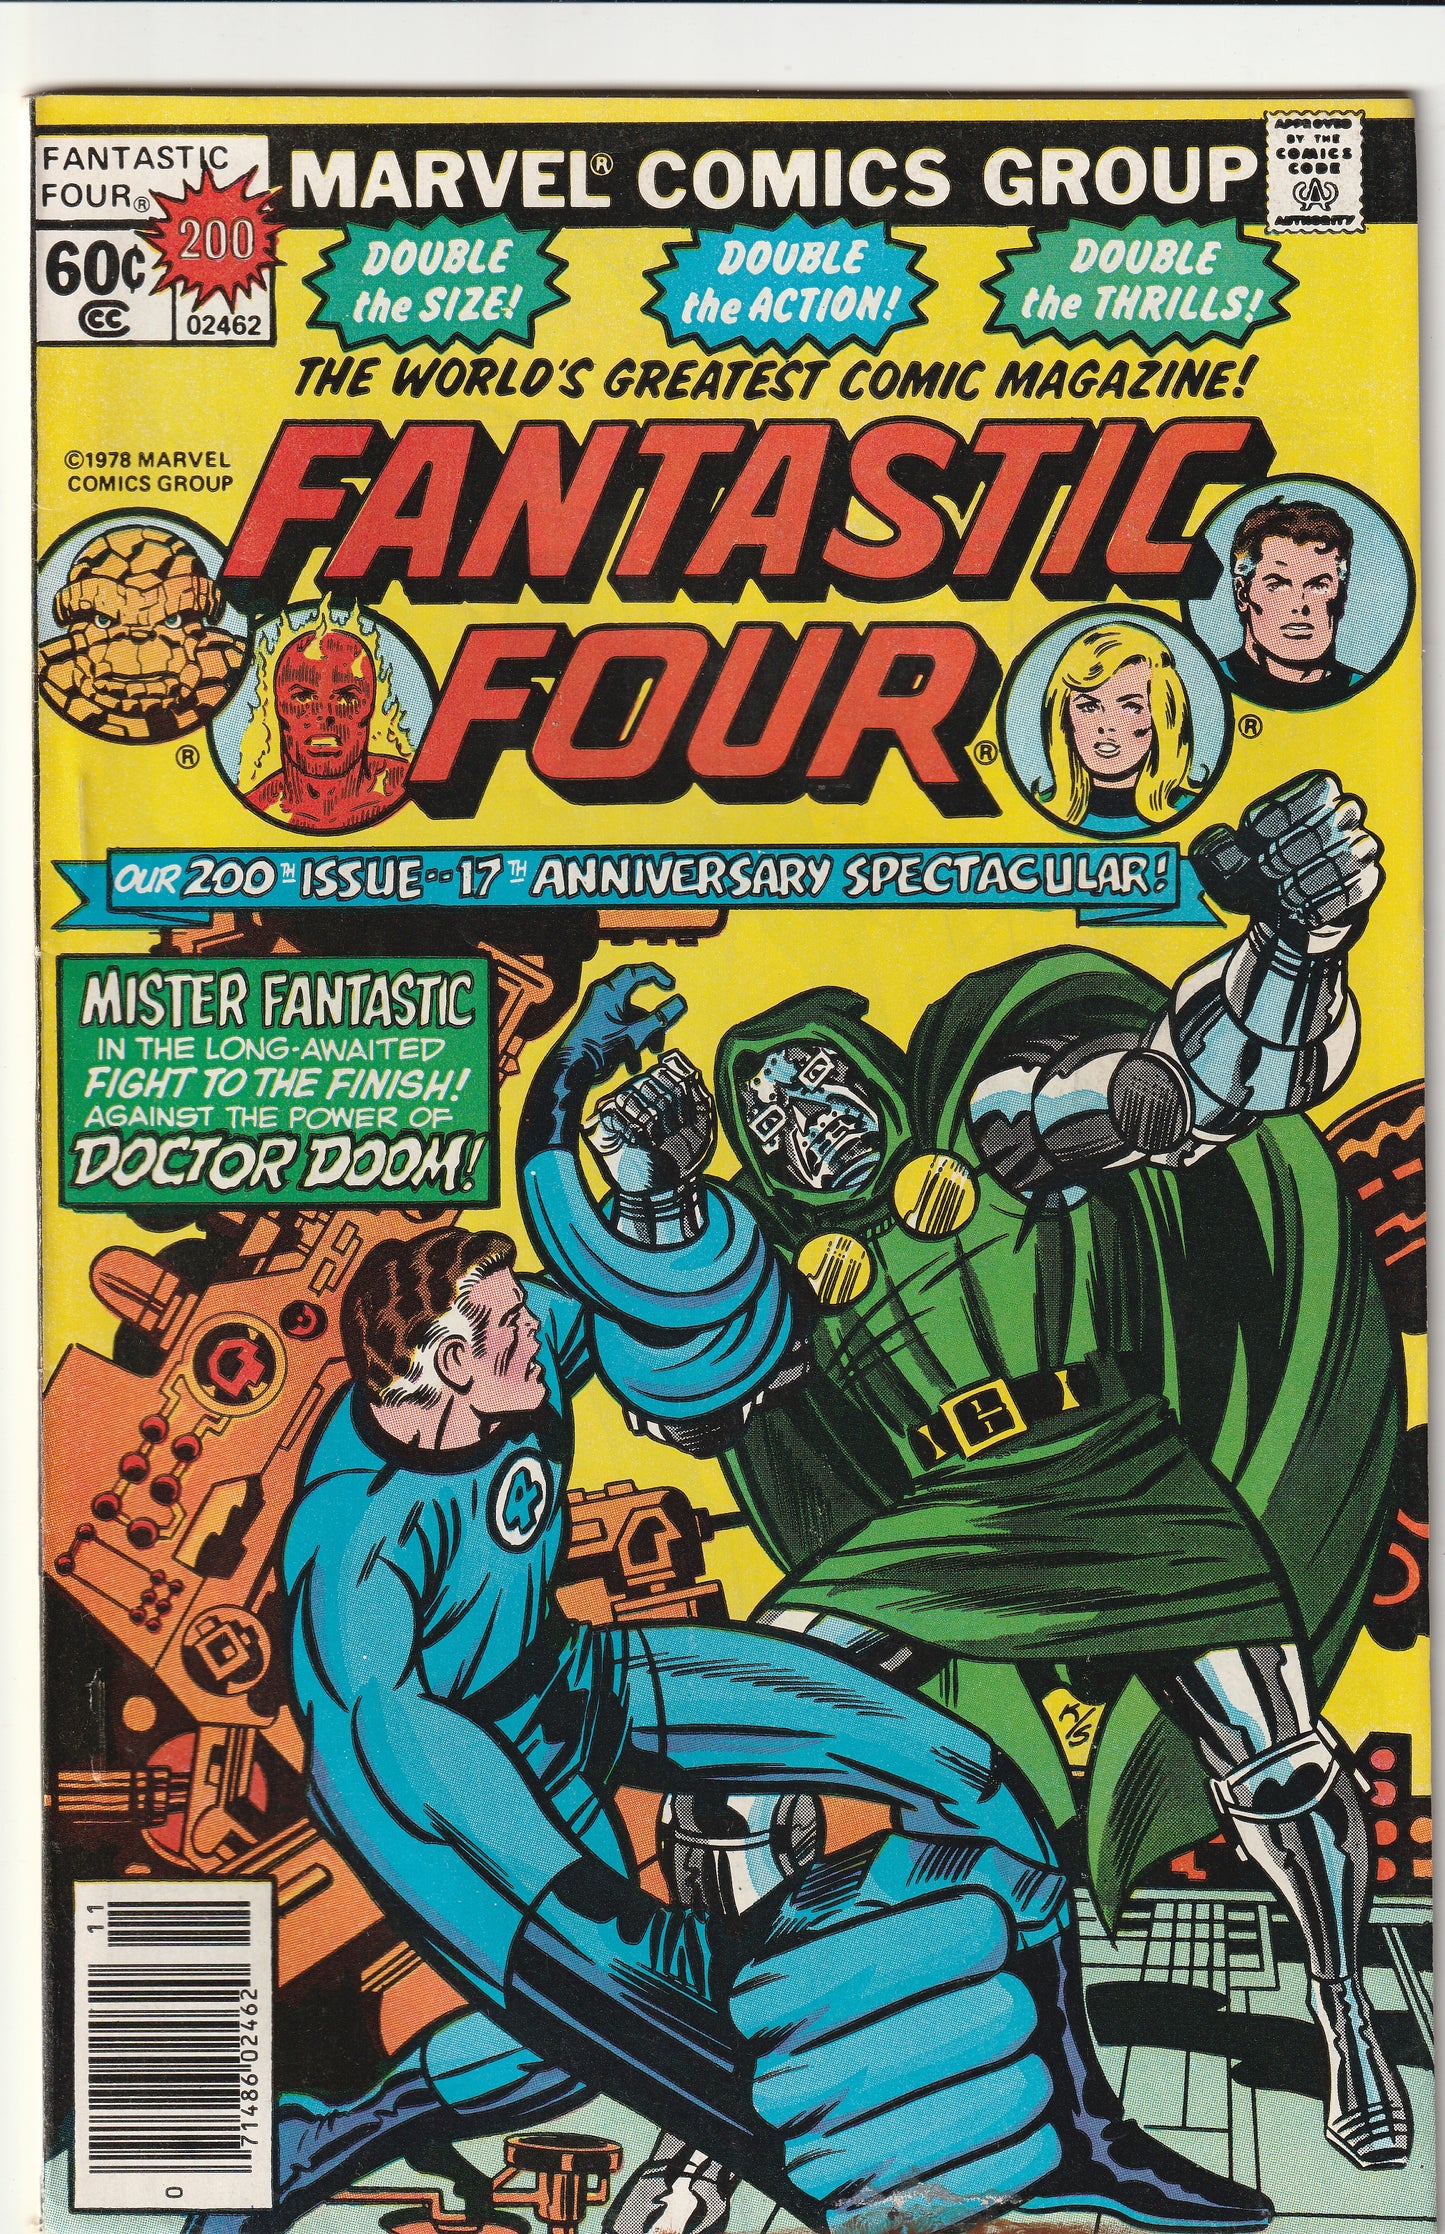 Fantastic Four #200 (1978) - Double-size issue